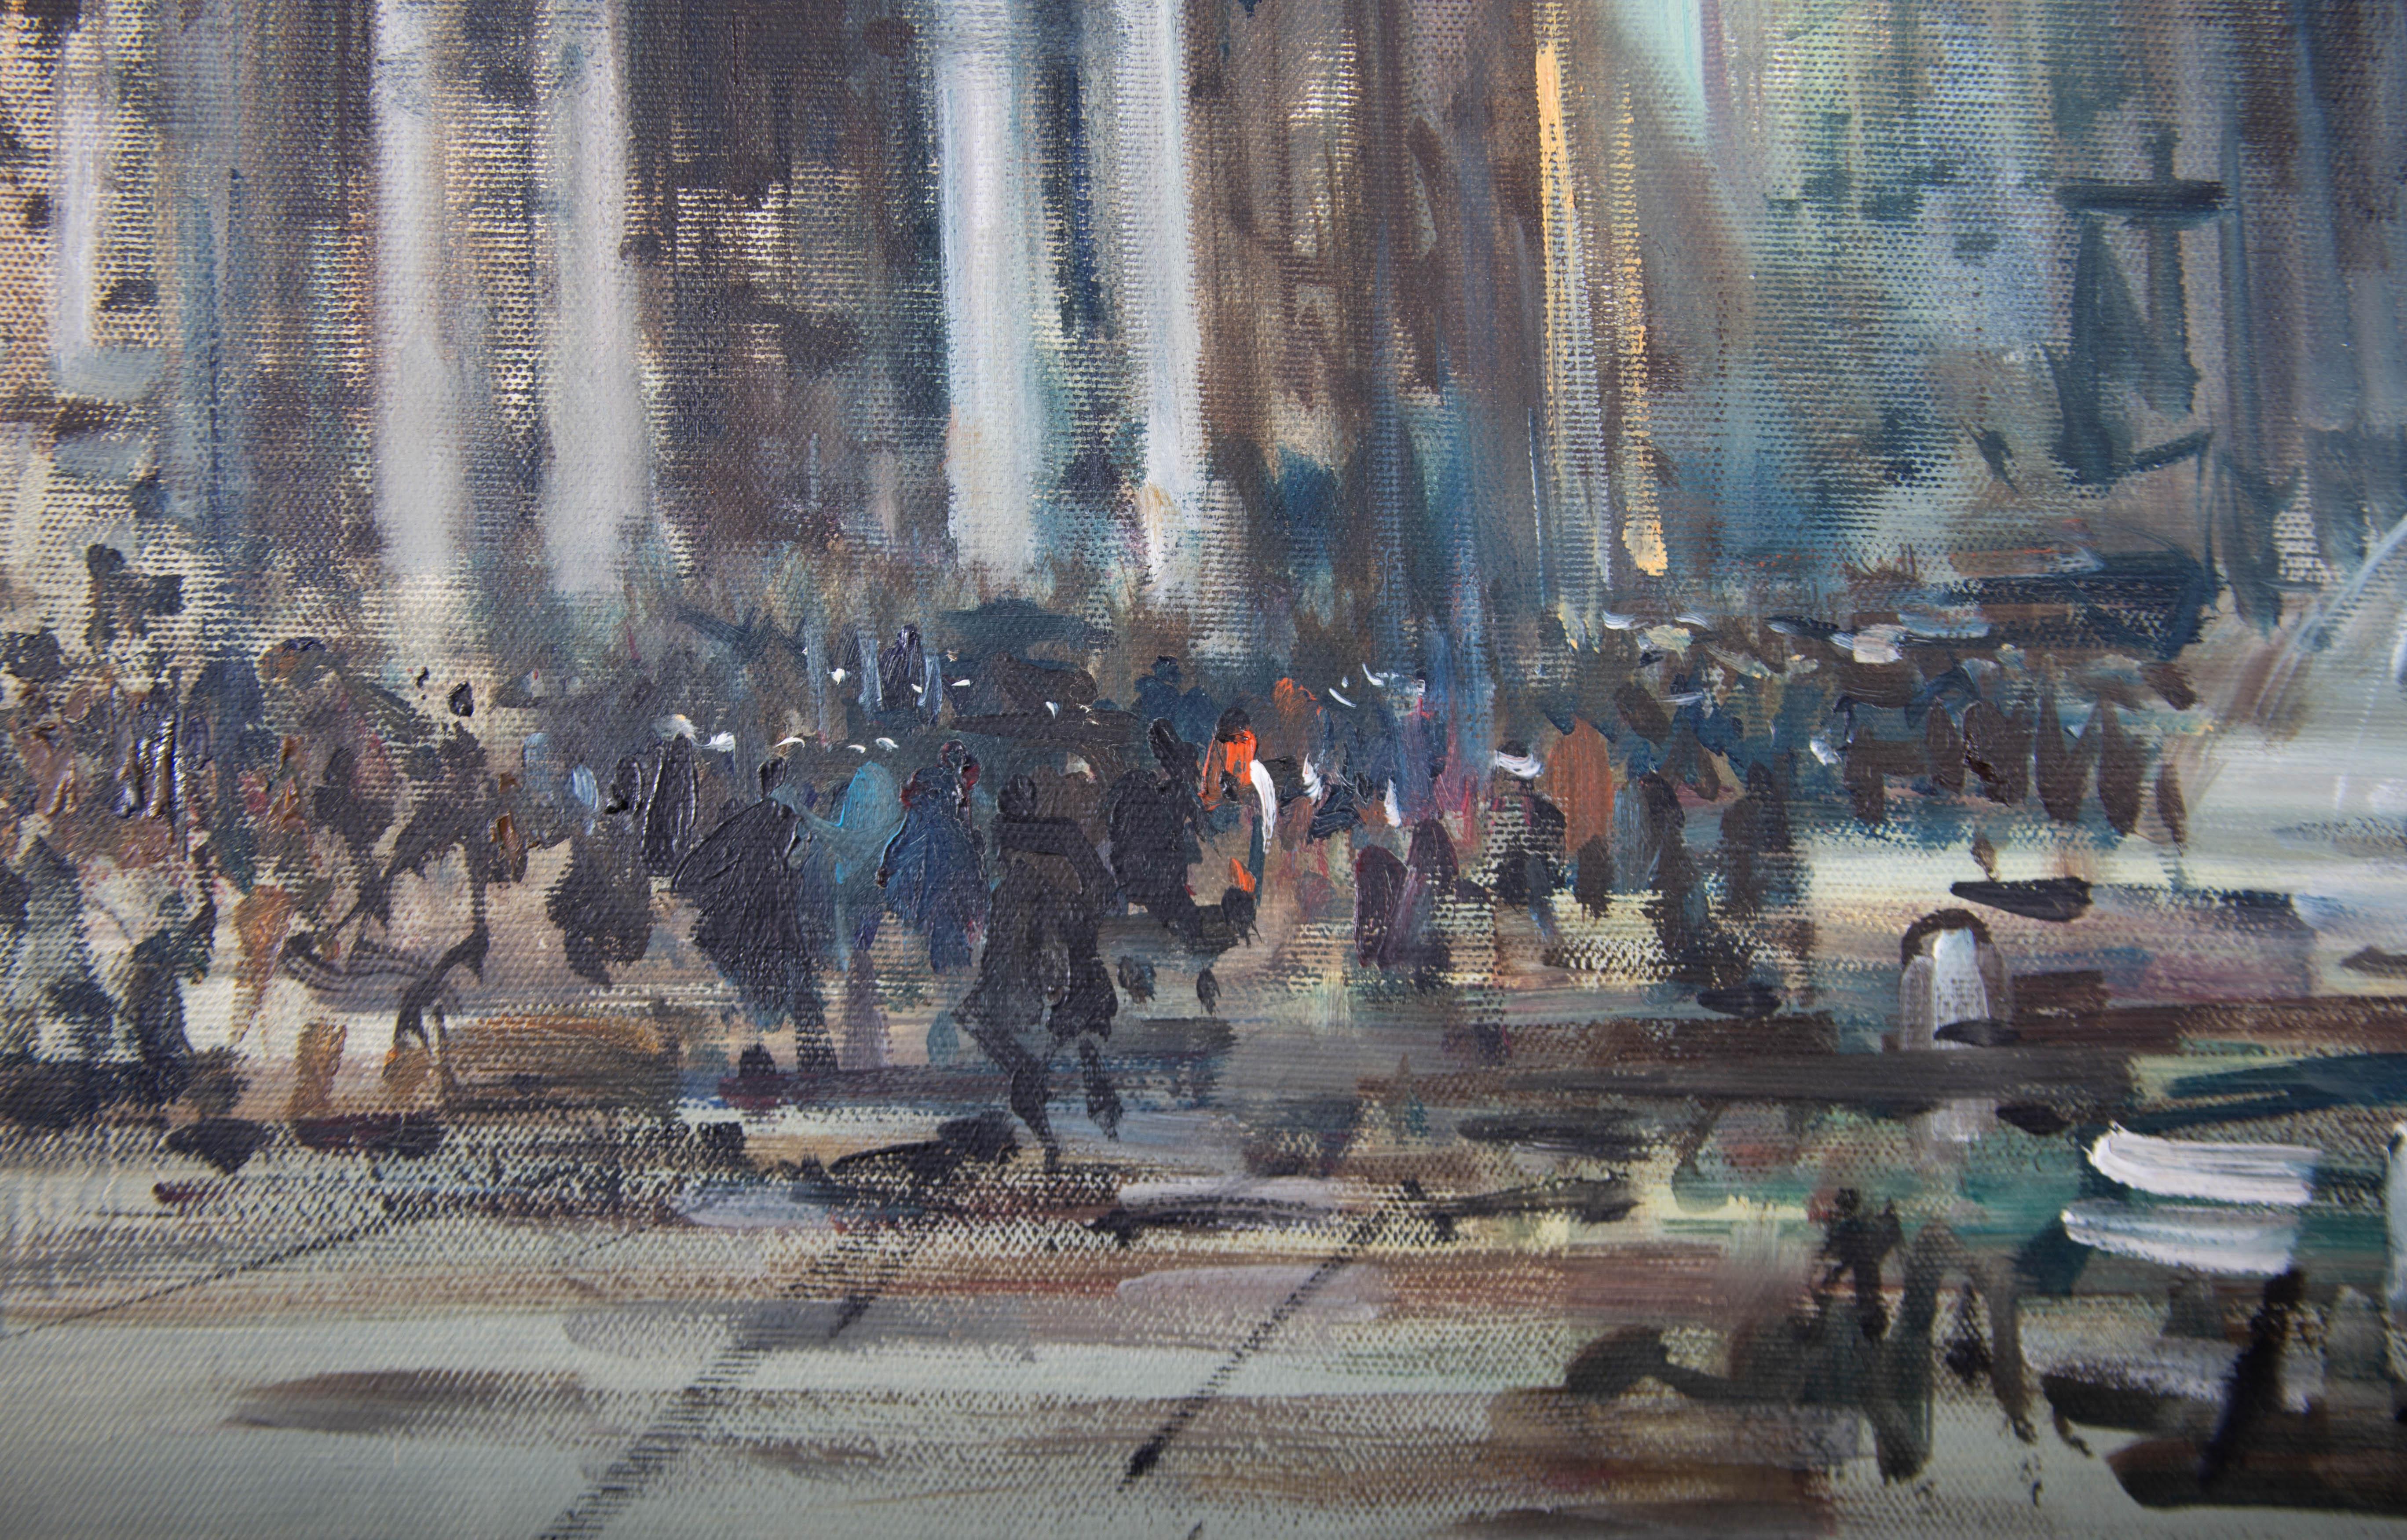 A very fine study of Piazza del Popolo, Rome. The artist has used quick, expressive brushstrokes to emulate the hoards of figures racing through the streets to great effect. Well presented in a silver gilt effect frame with canvas slip. Signed